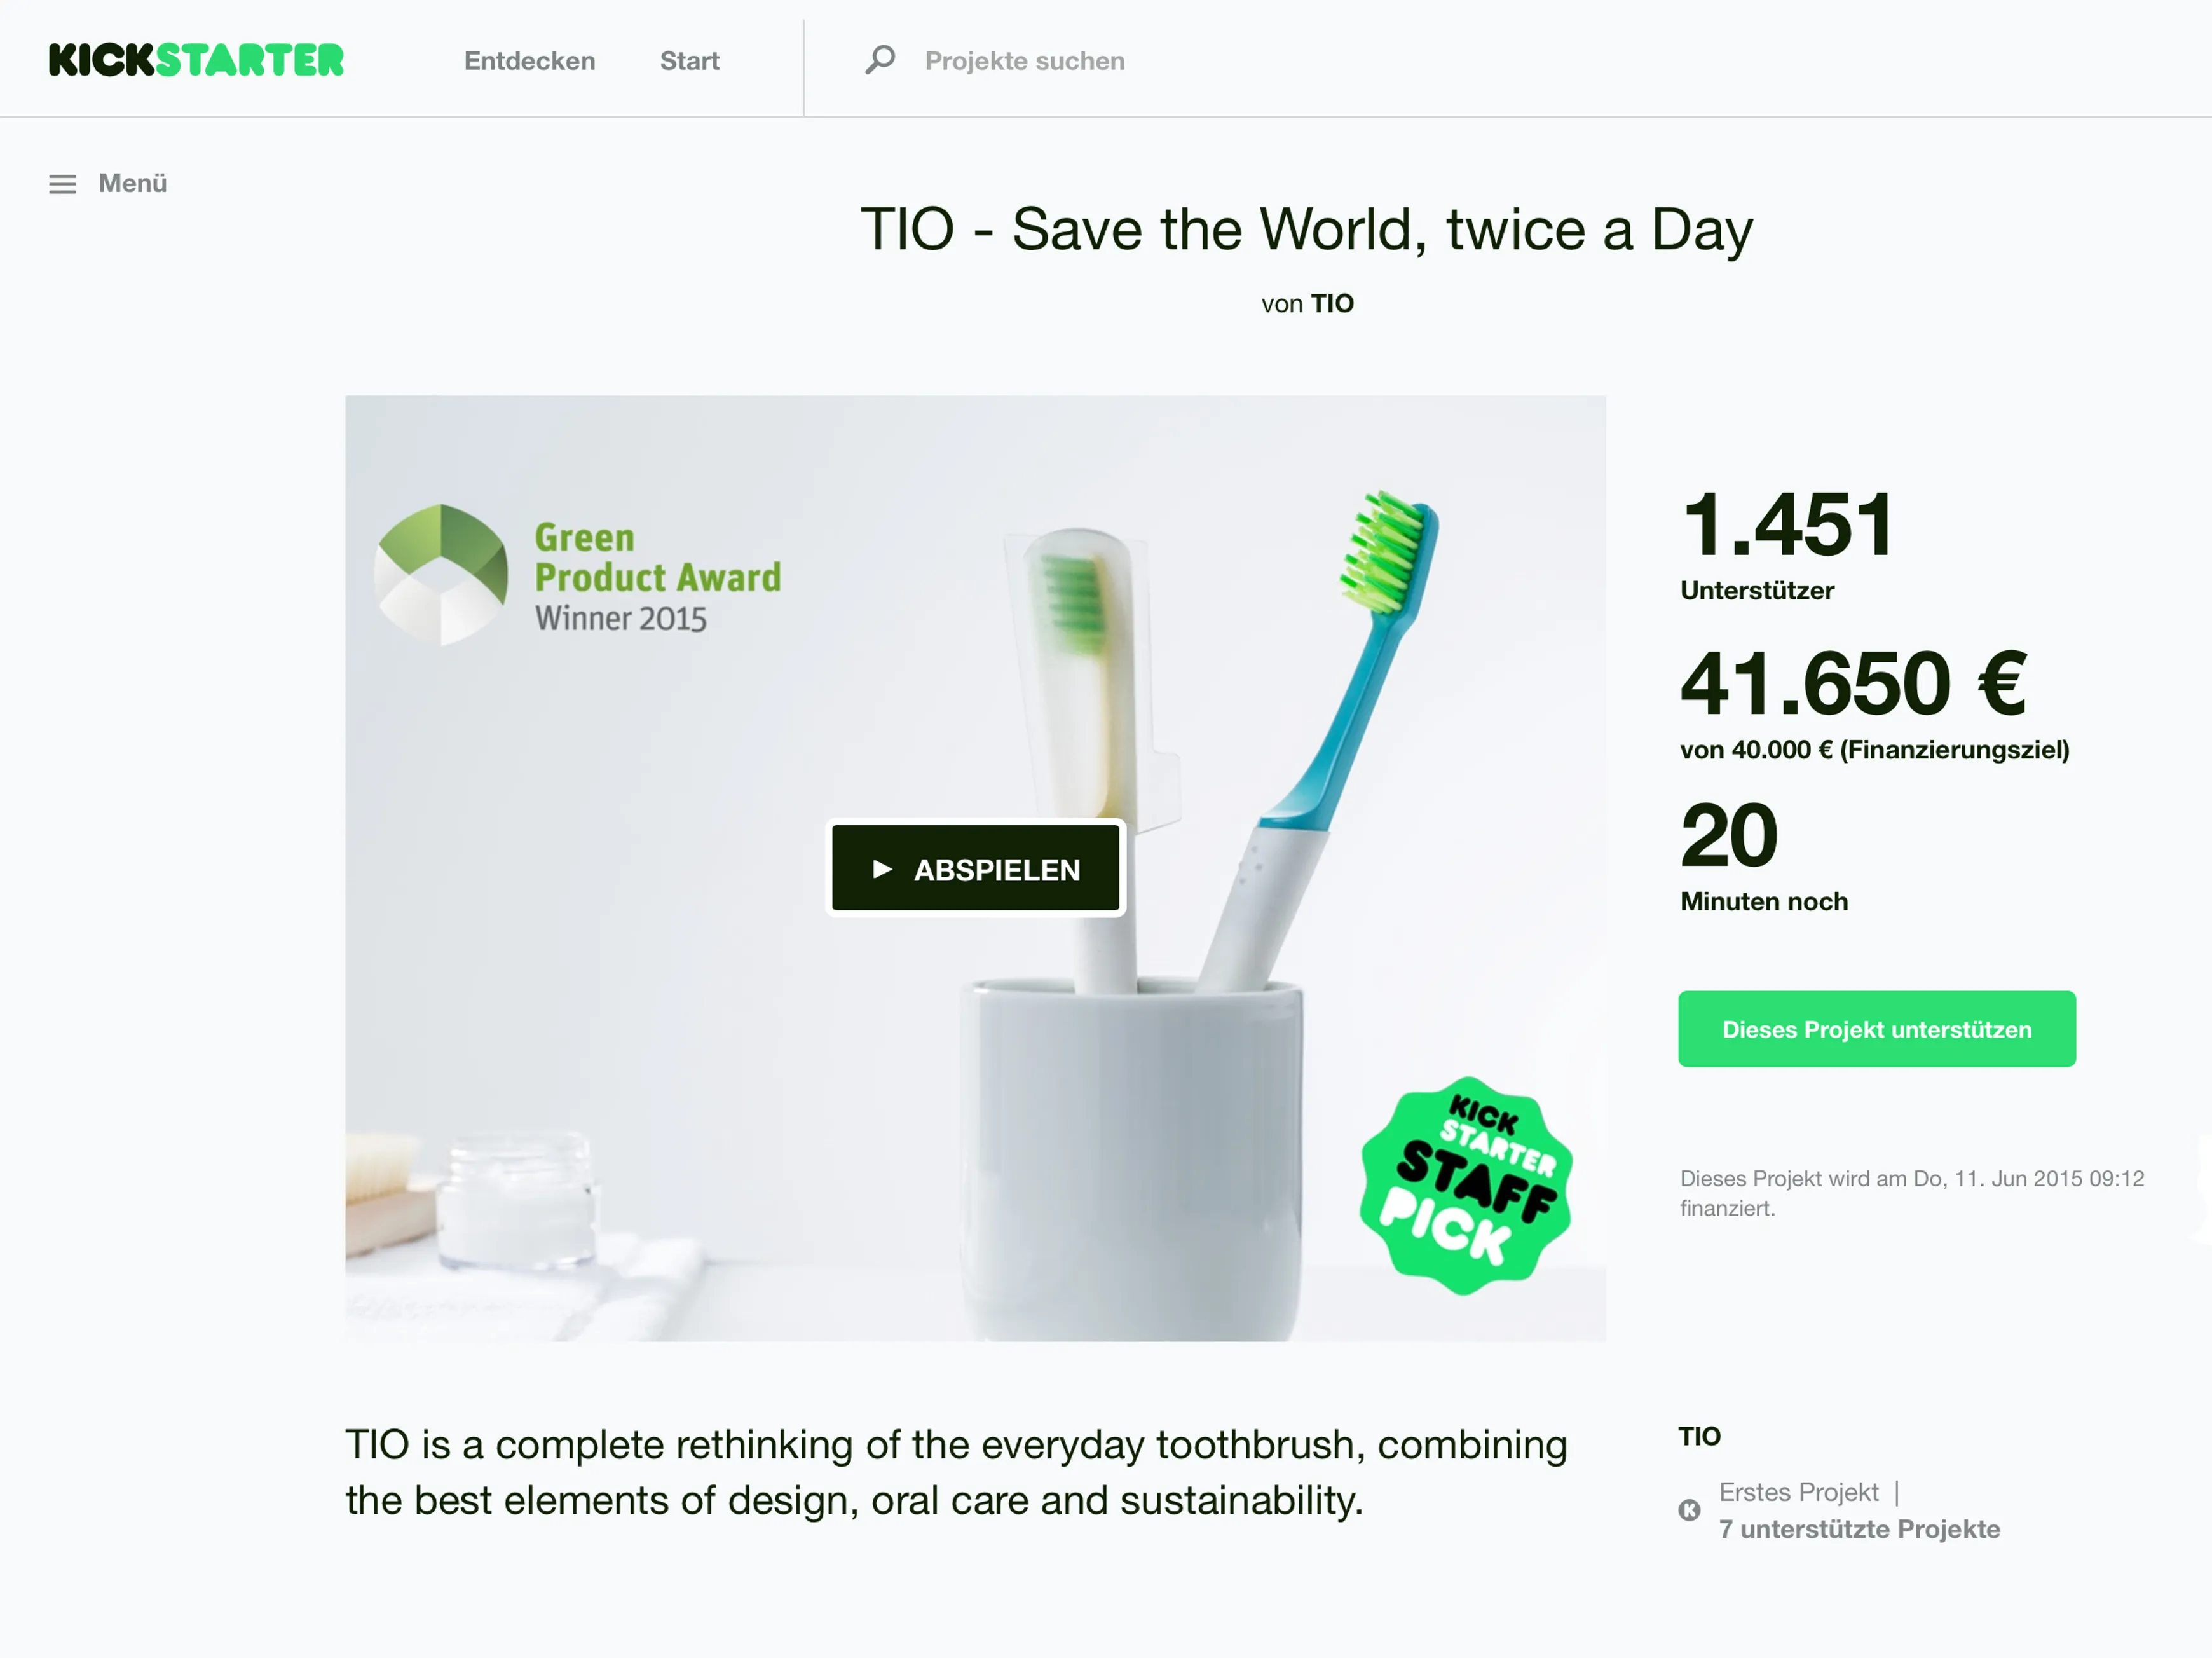 Screenshot of the TIO Kickstarter campaign showing that it reached its funding goal of 40000 euros